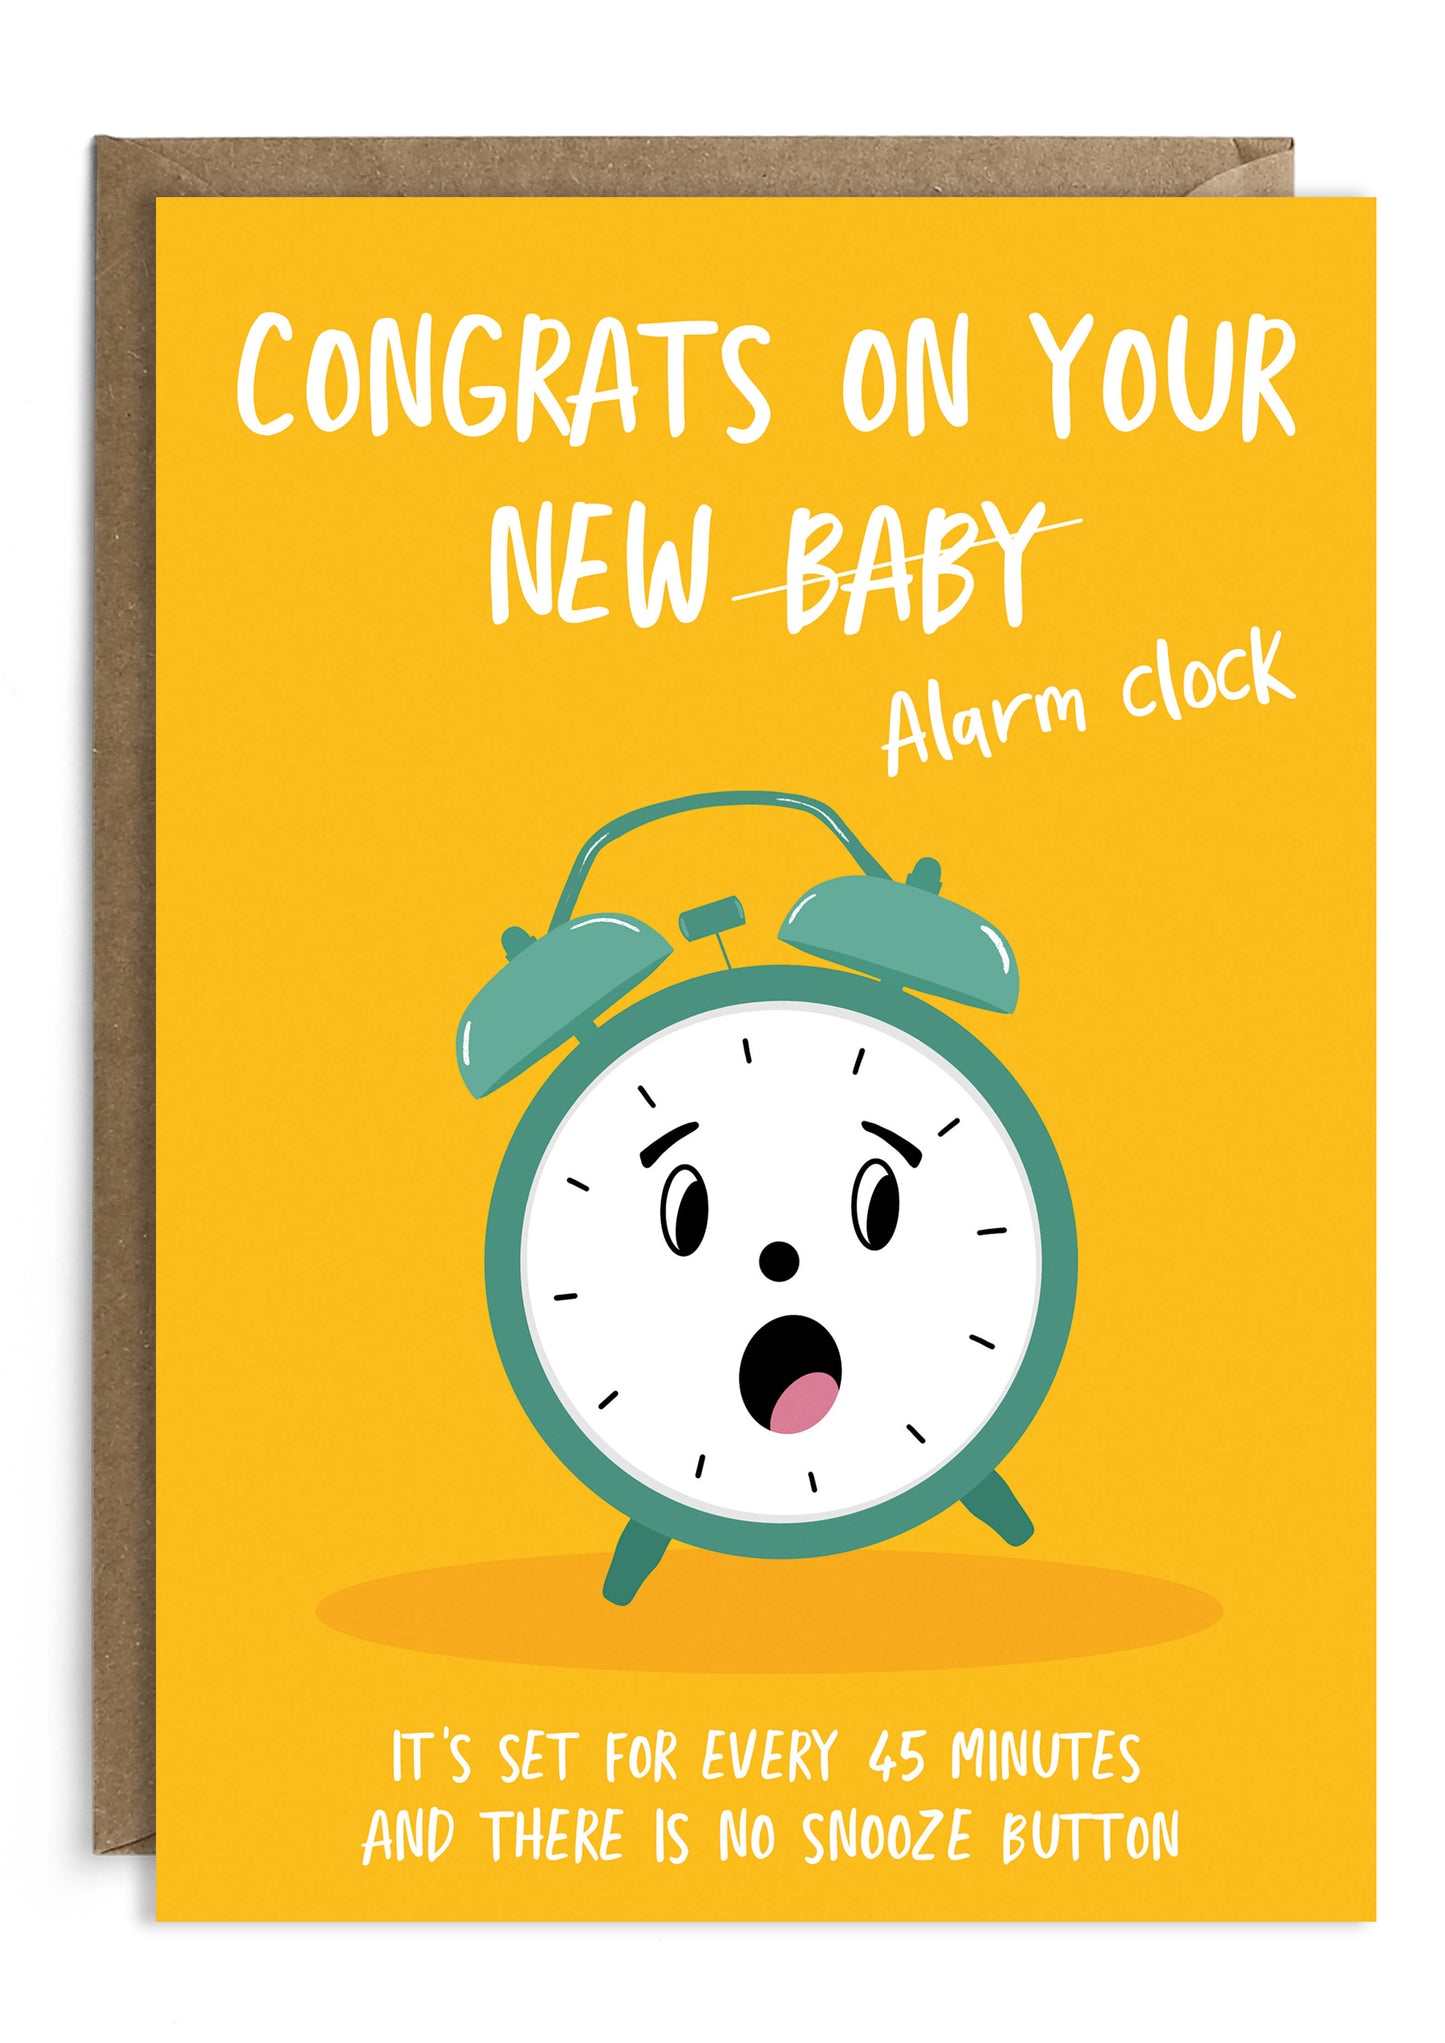 Funny new baby card featuring an alarm clock on yellow background.